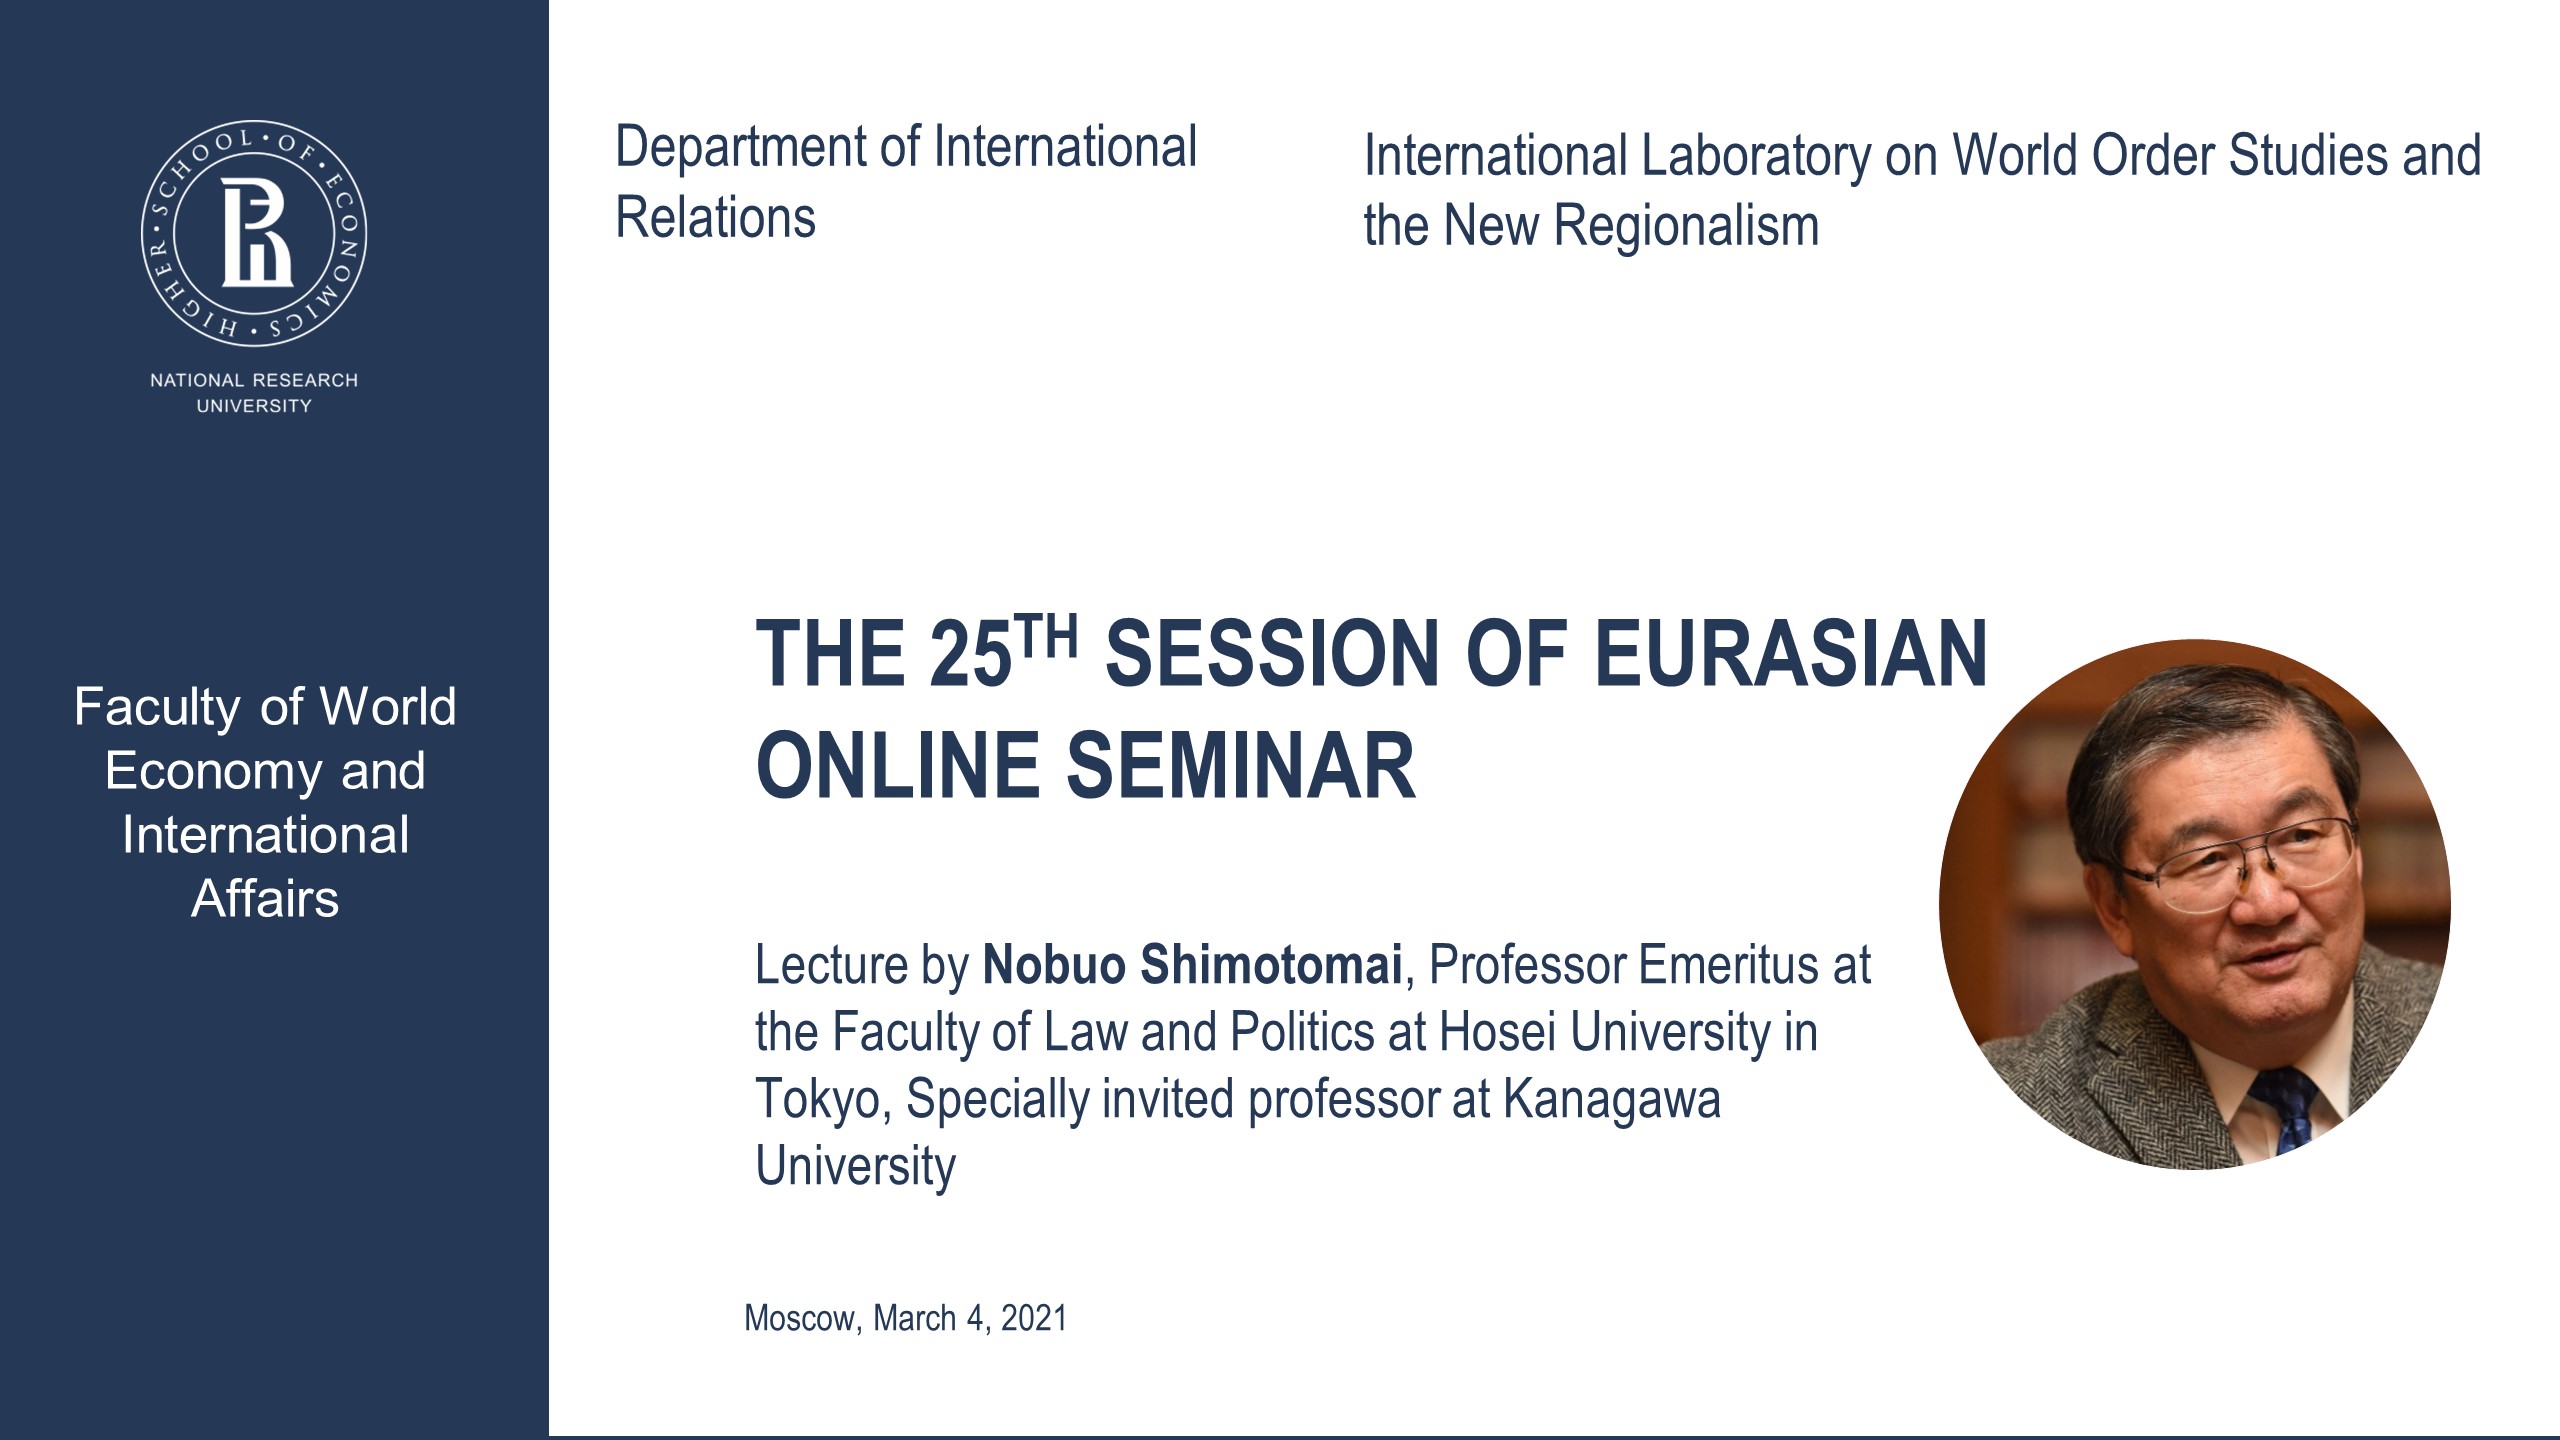 The 25th Session of Eurasian Online Seminar with Professor Nobuo Shimotomai